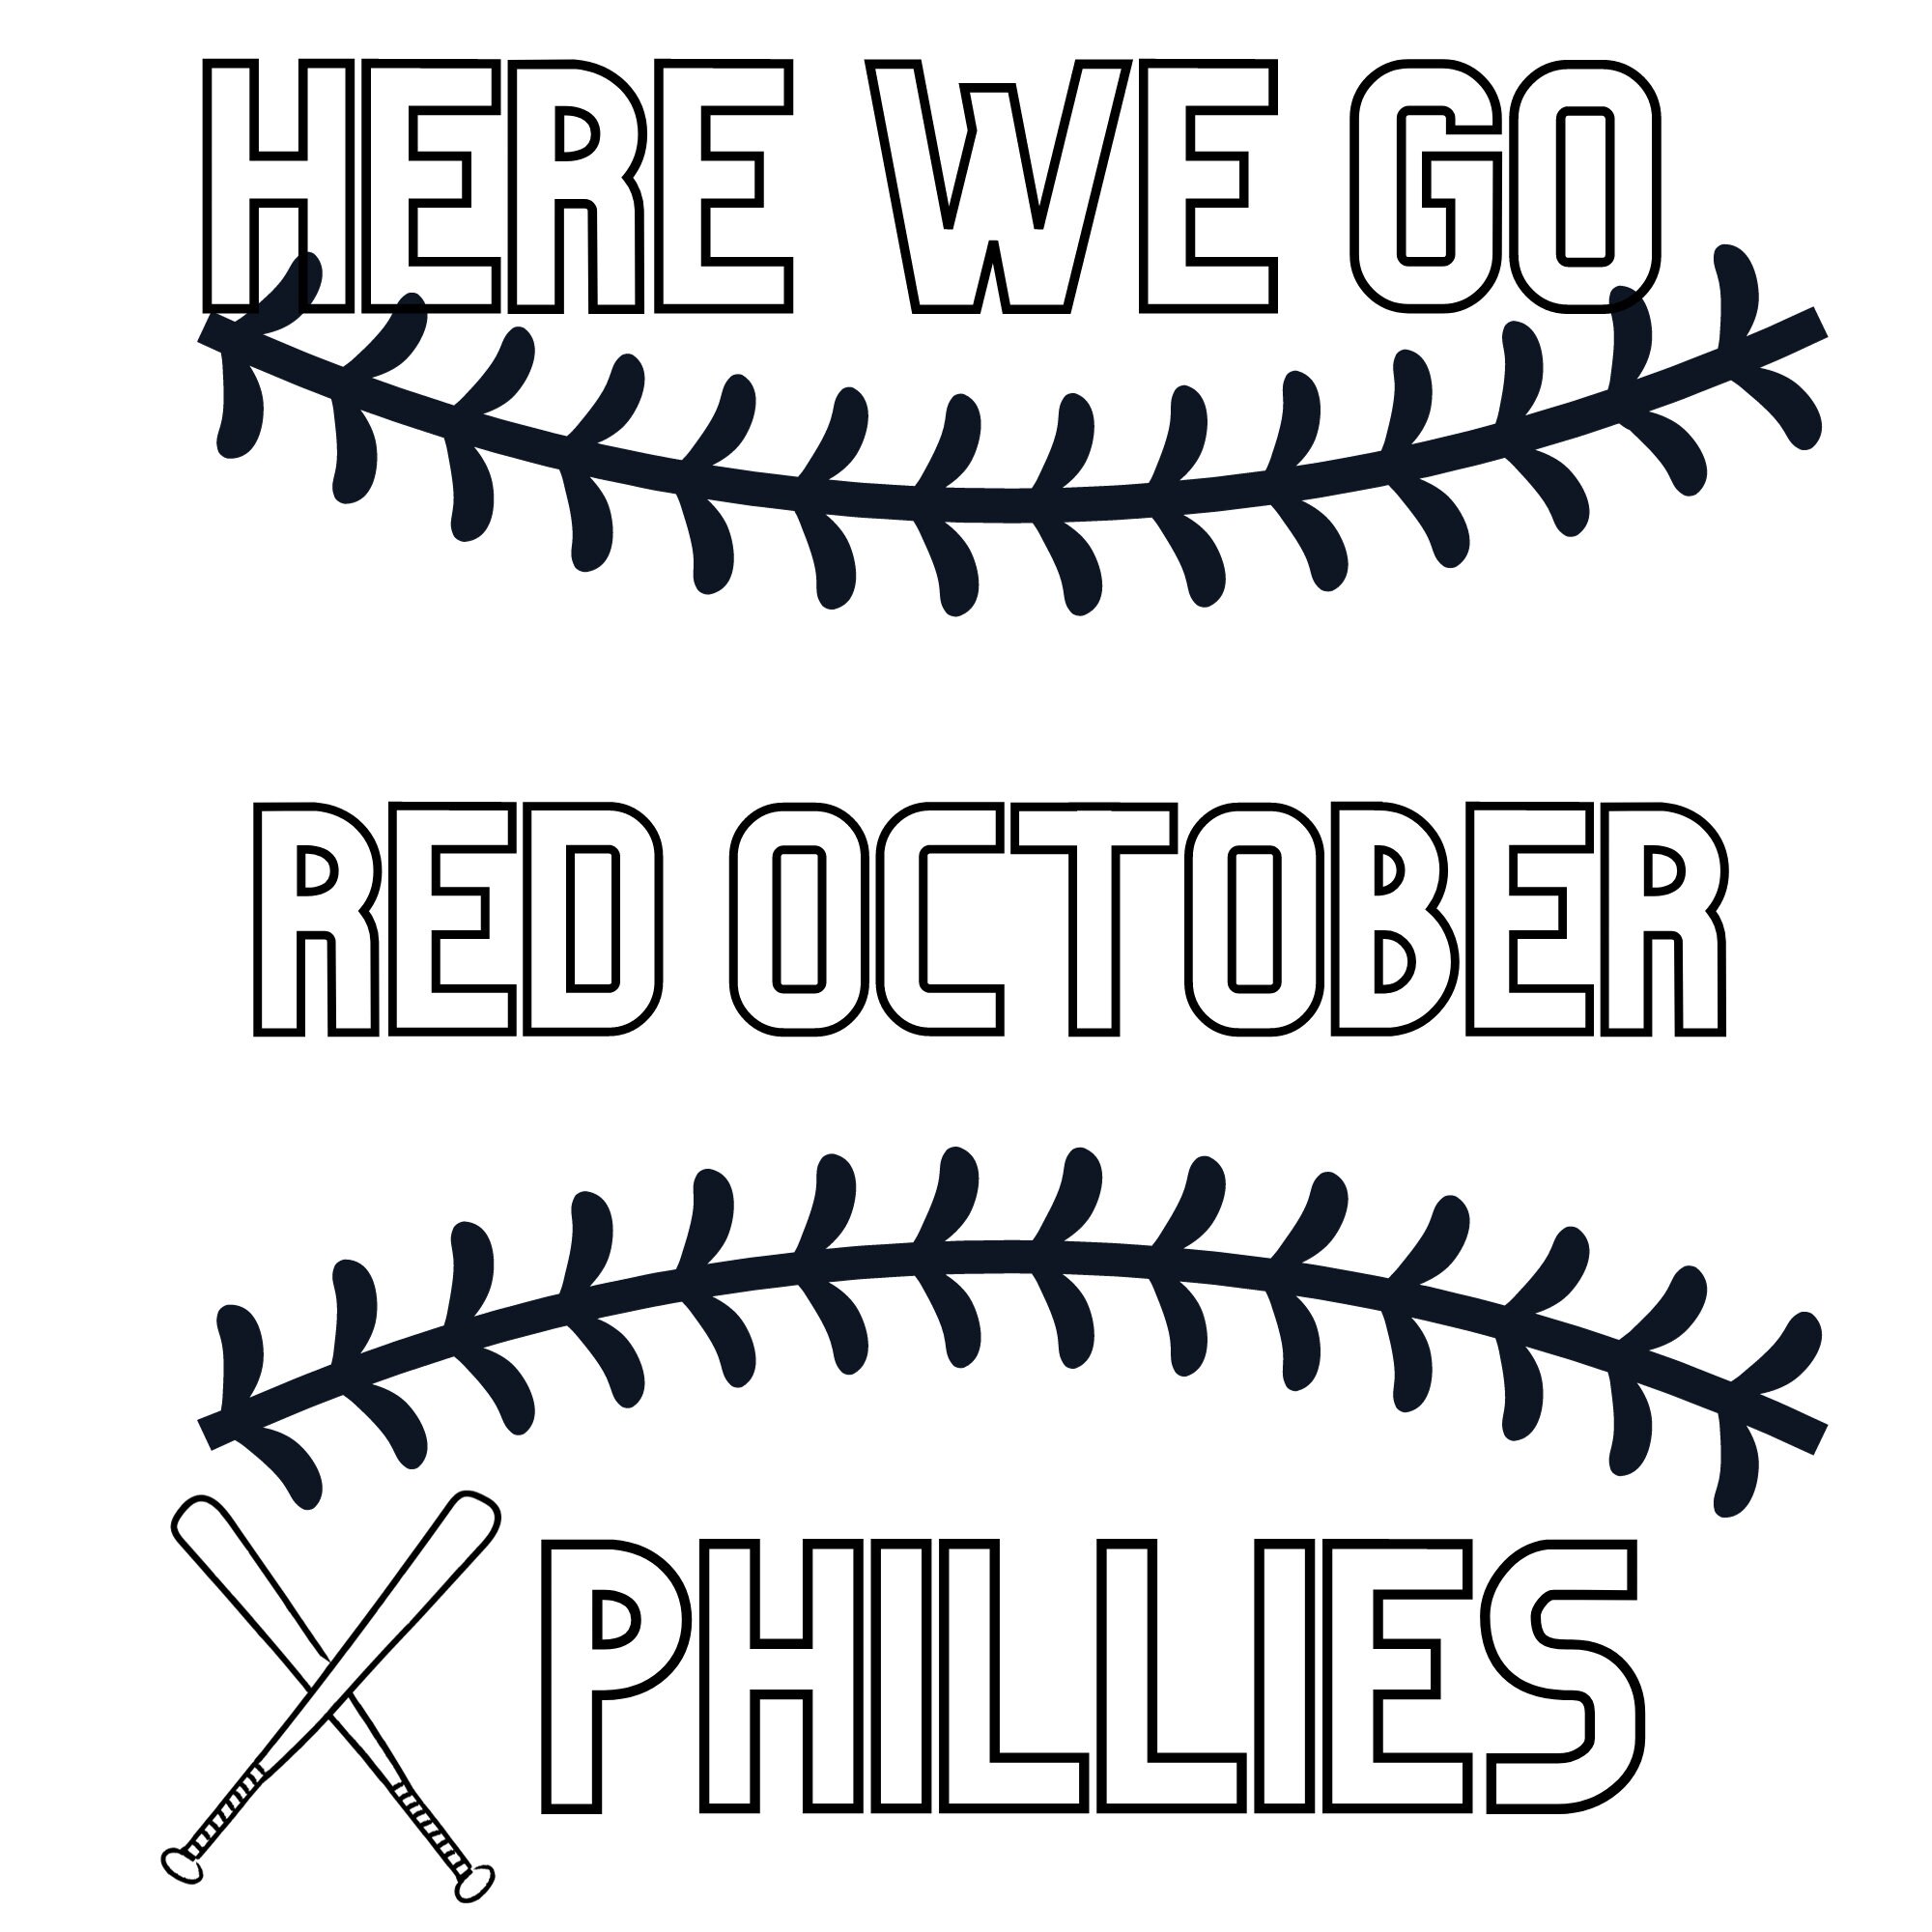 Here we go red october phillies kids printable coloring page